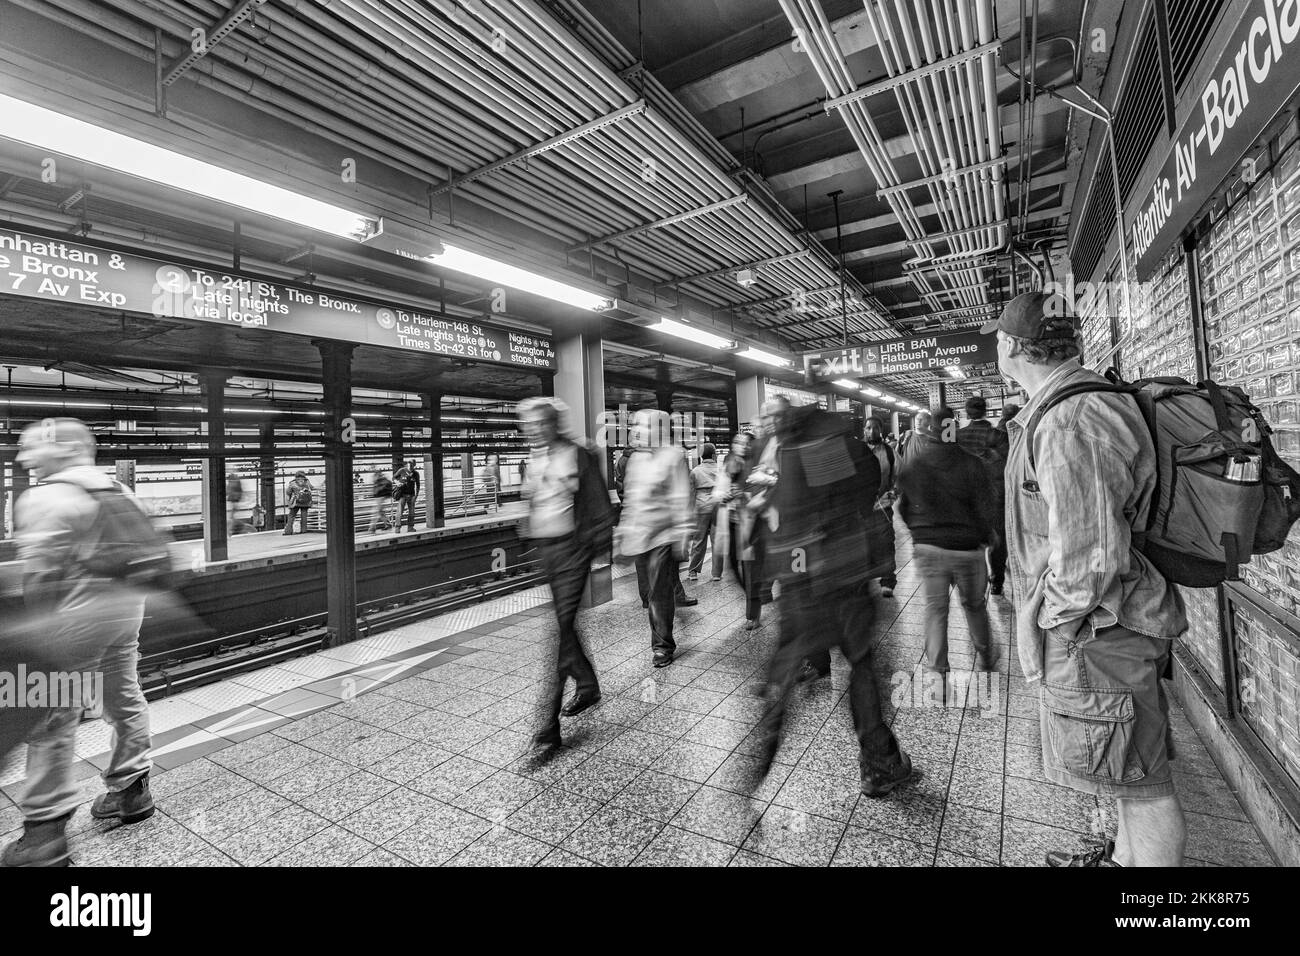 New York, USA - October 21, 2015: People wait at subway station Wall street in New York. With 1.75 billion annual ridership, NYC Subway is the 7th bus Stock Photo